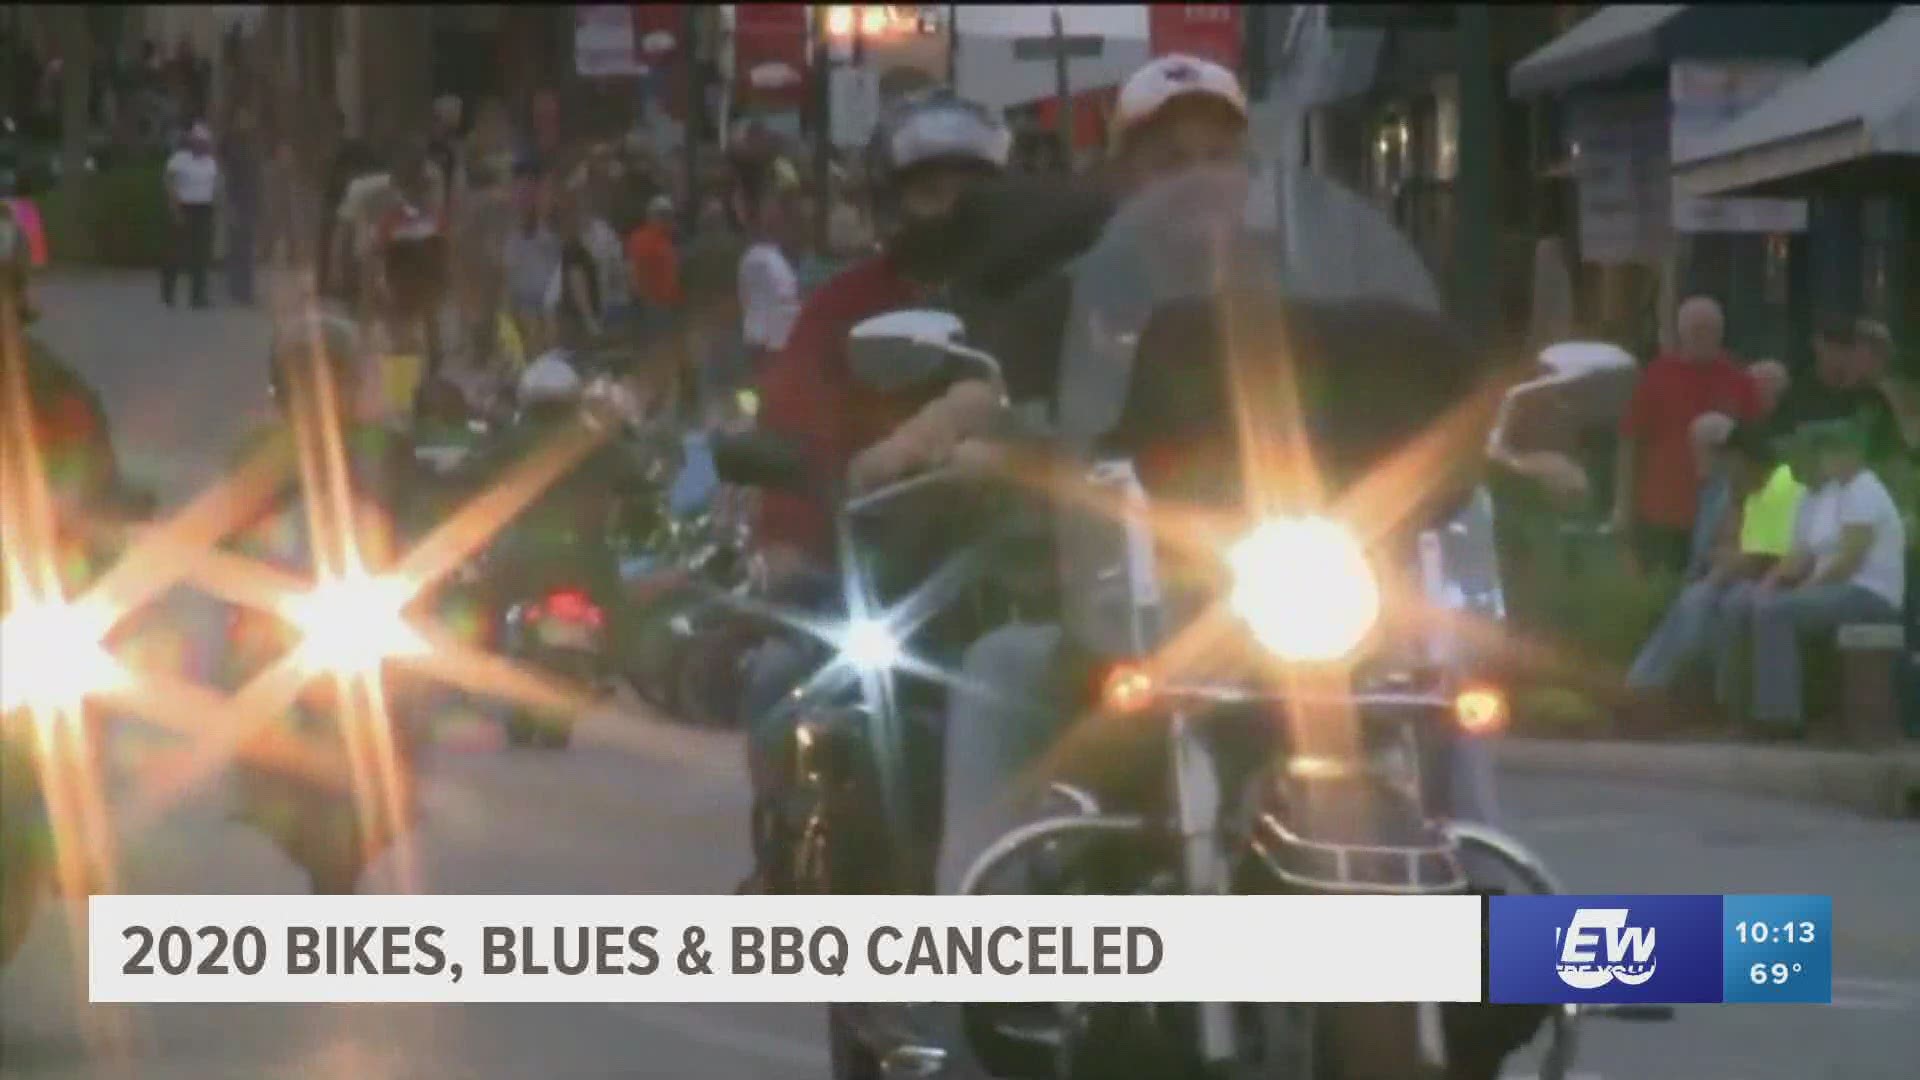 Bikes, Blues & BBQ is expected to return on September 22, 2021. https://bit.ly/2MUQi0Y